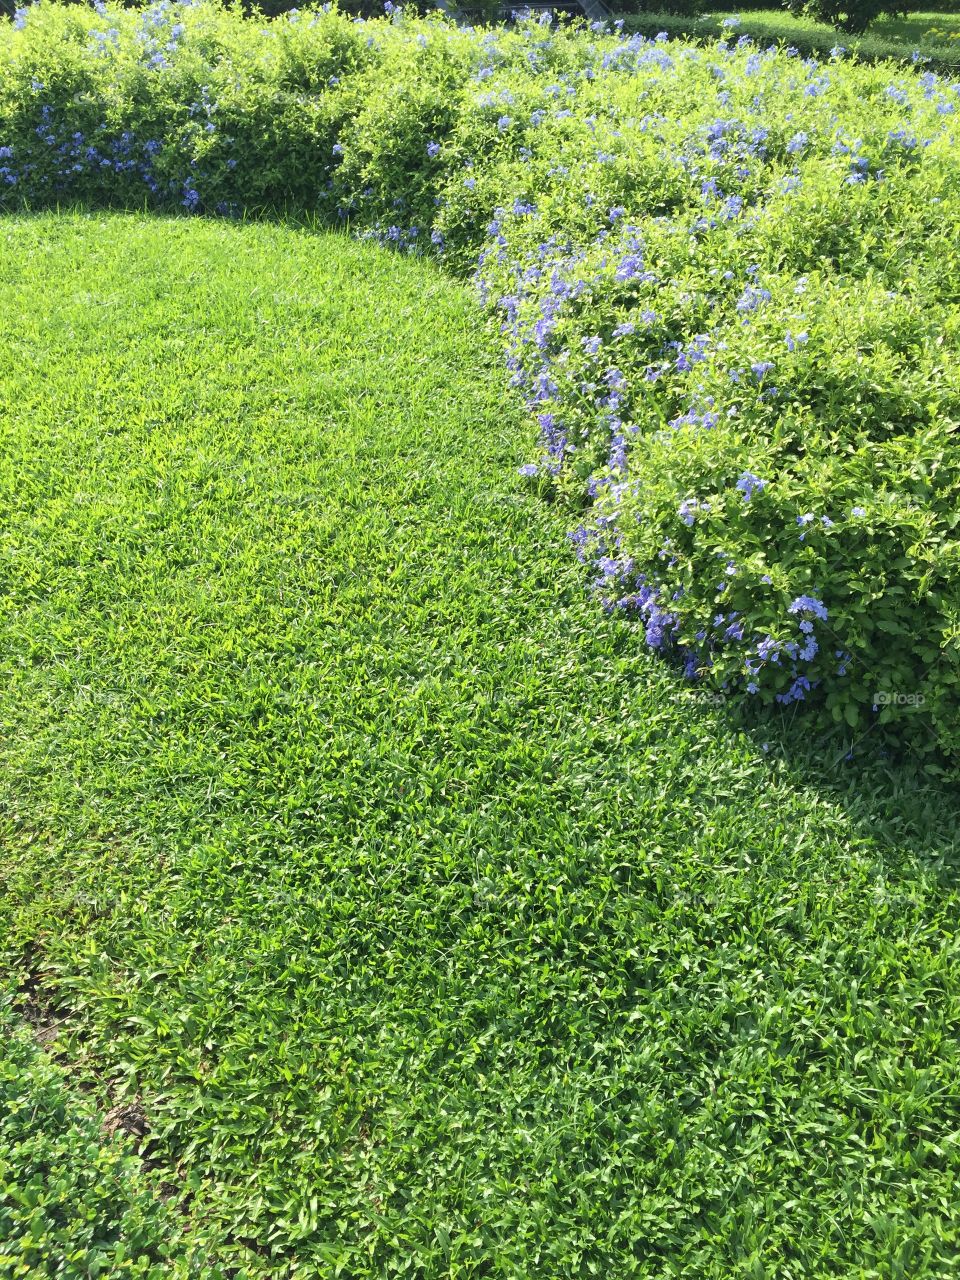 Green lawn with purple flower